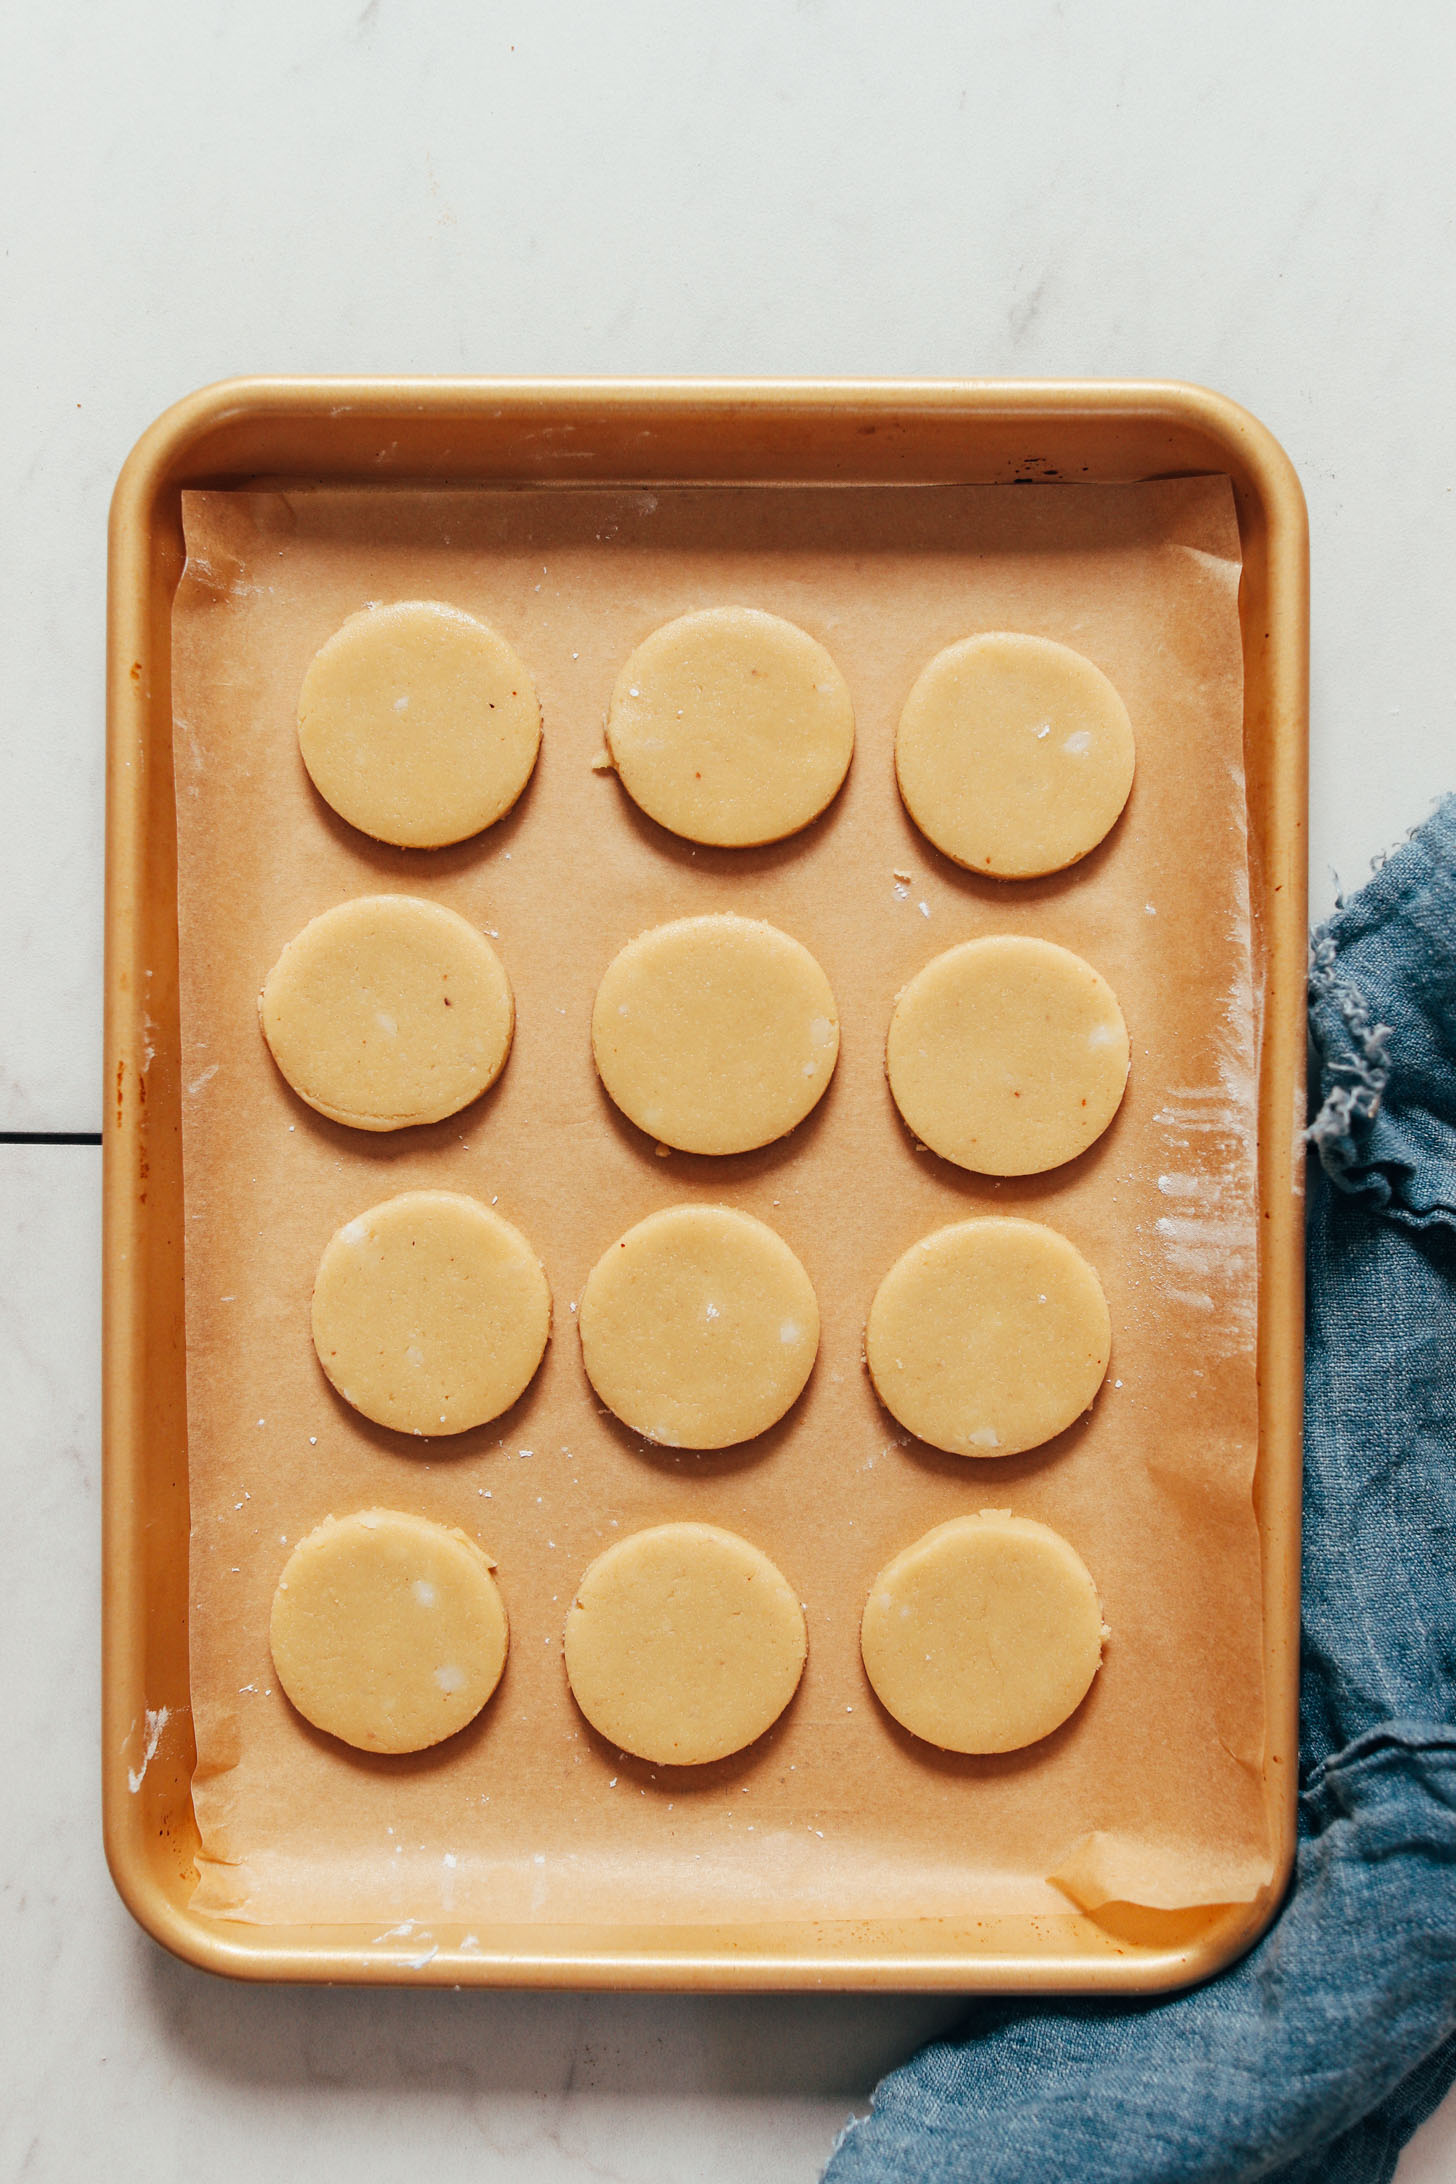 Unbaked shortbread cookie dough on a baking sheet